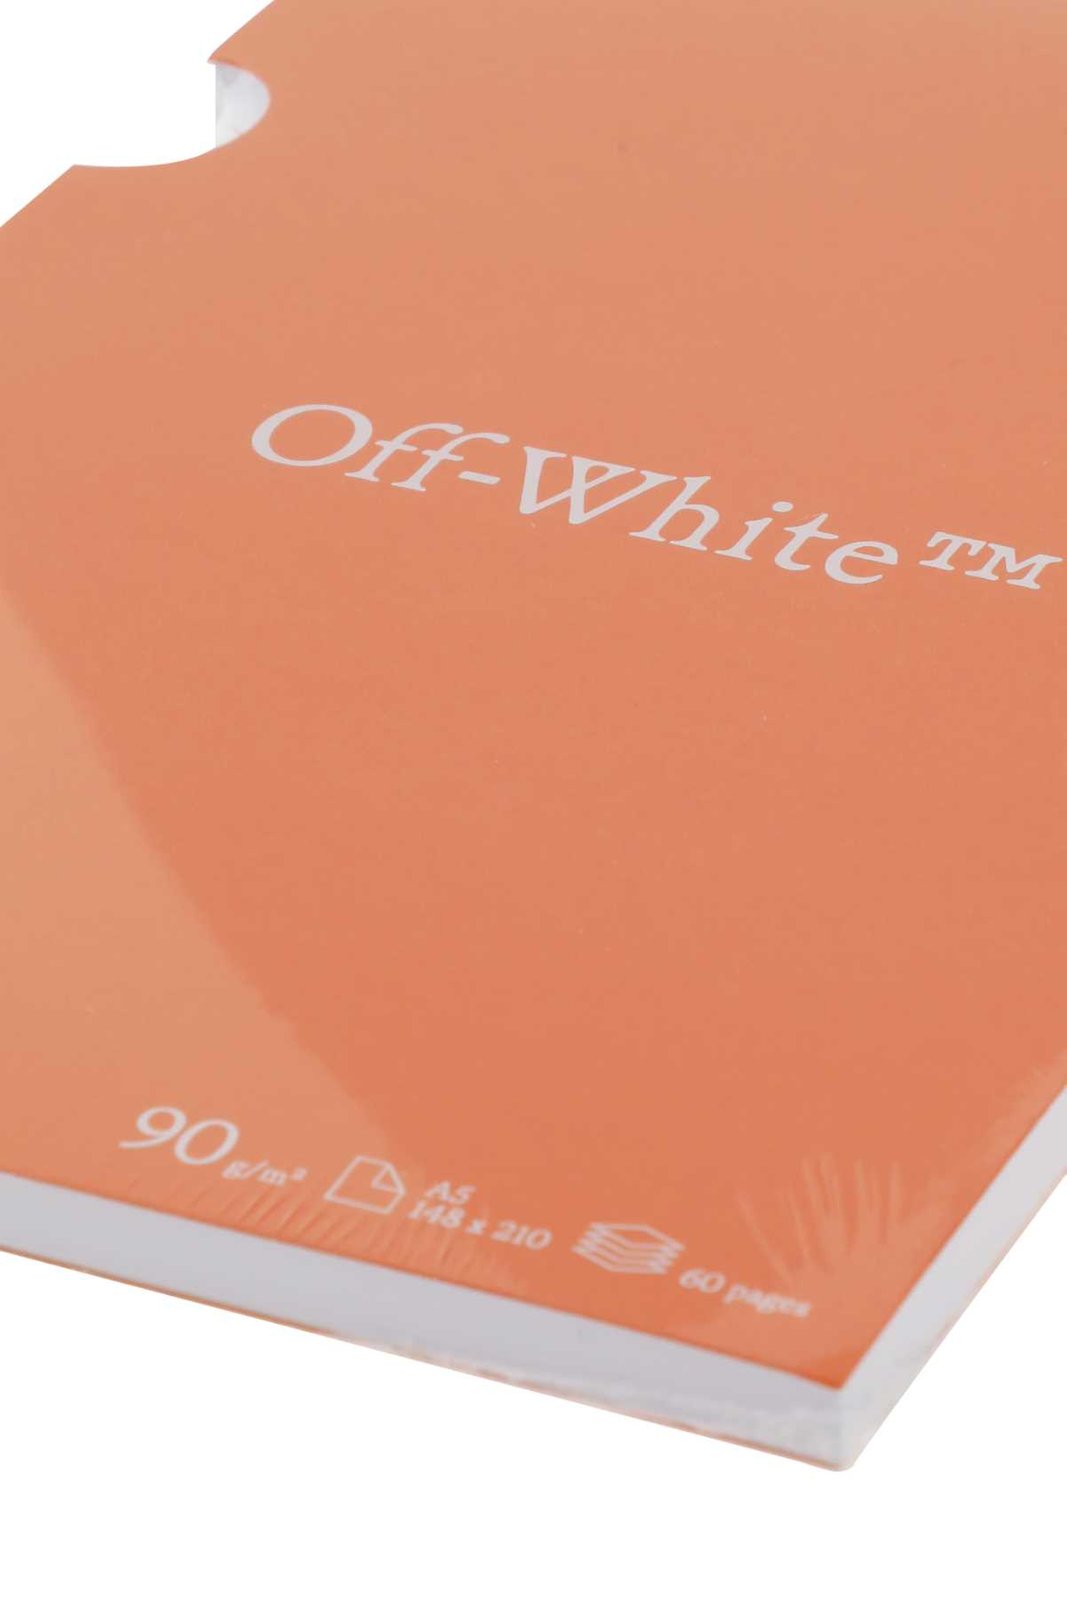 Off-White Meteor Logo Printed Cut-Out Notepad